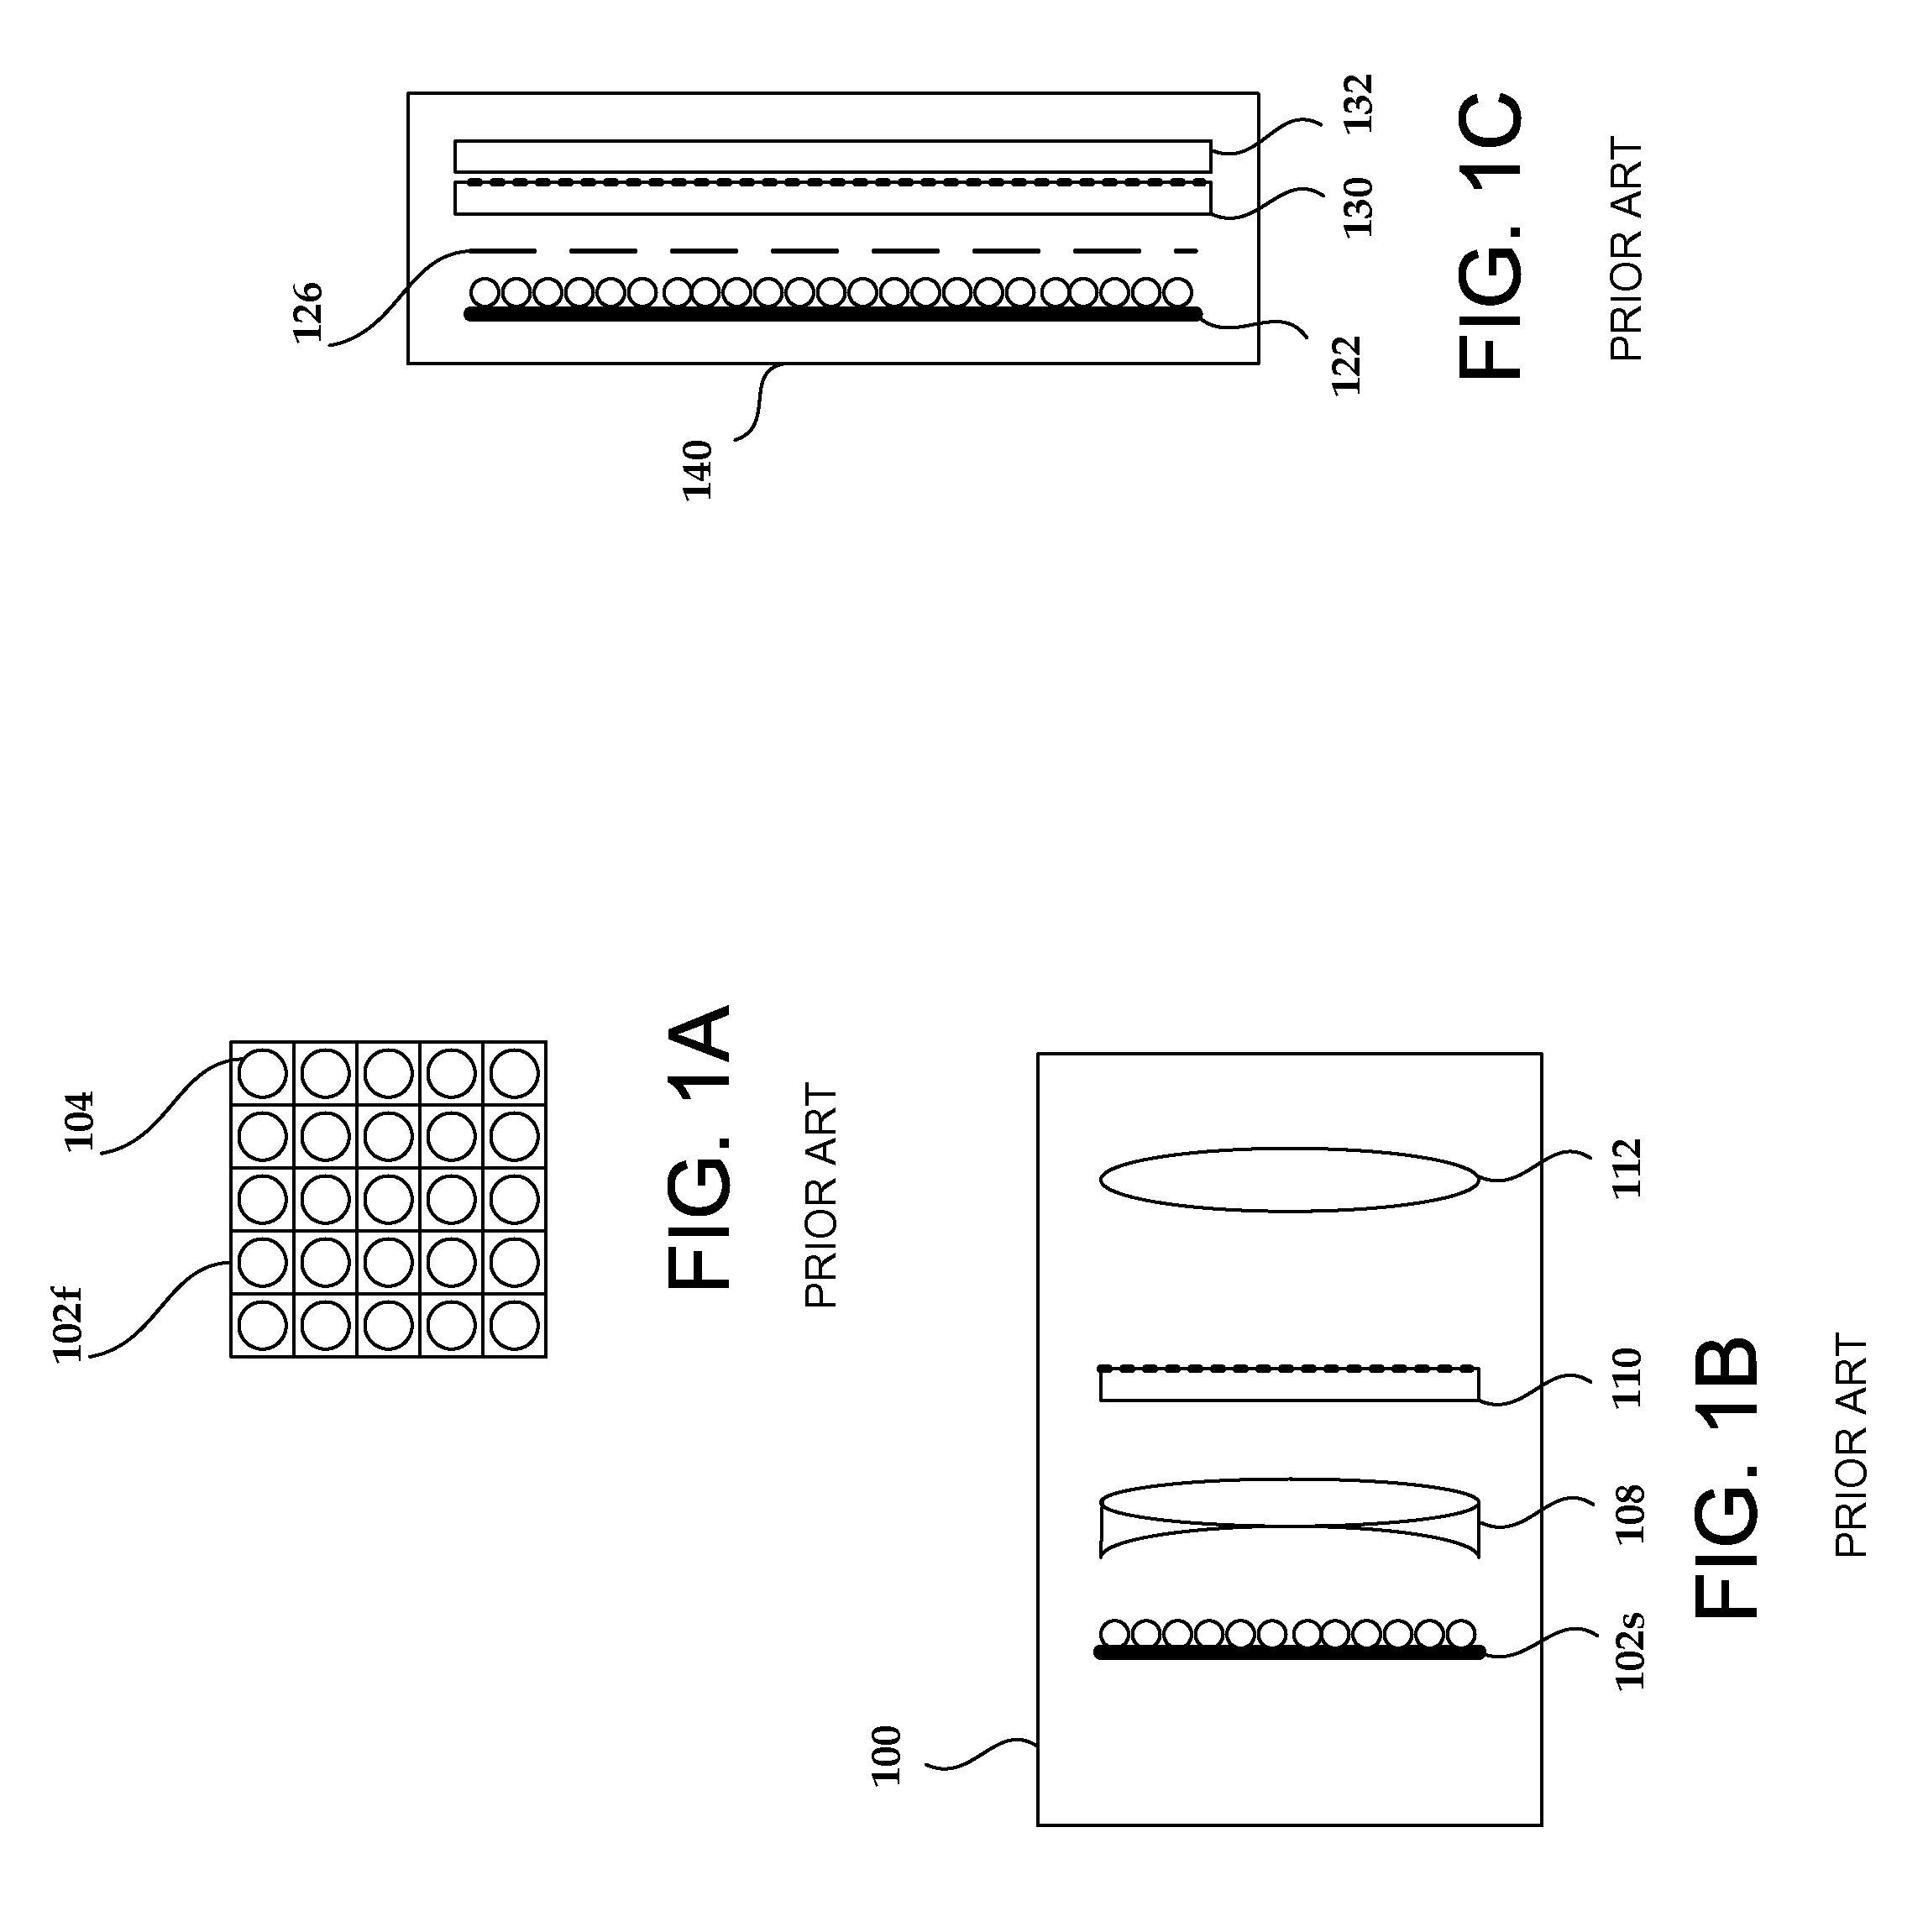 Image and light source modulation for a digital display system